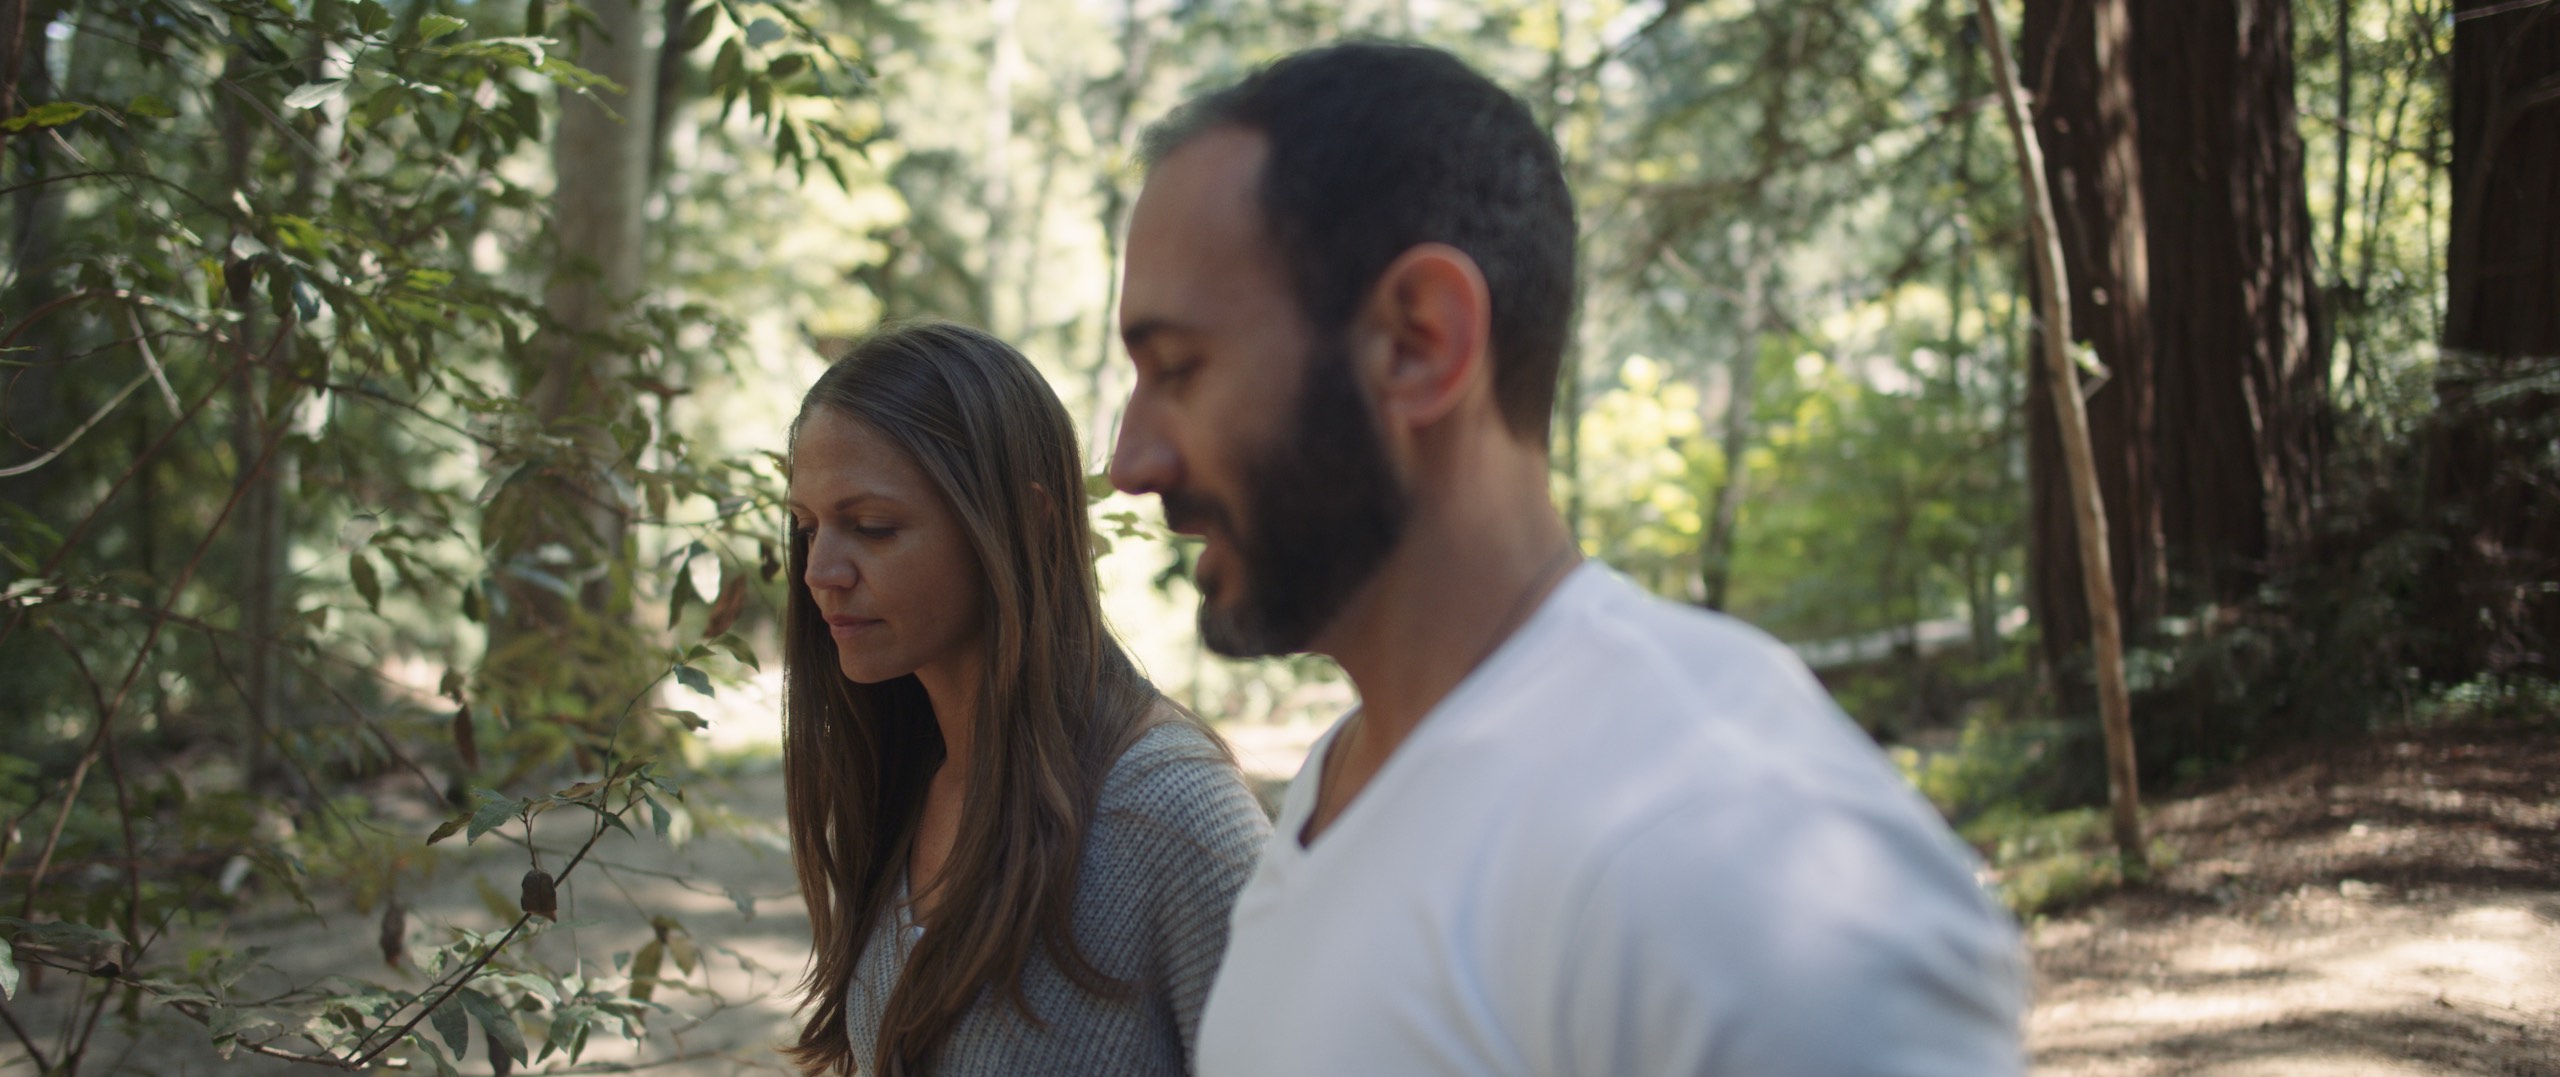 The Dailies Season 2 Episode 3 Komuso Big Sur with side profile of man and woman walking in the woods